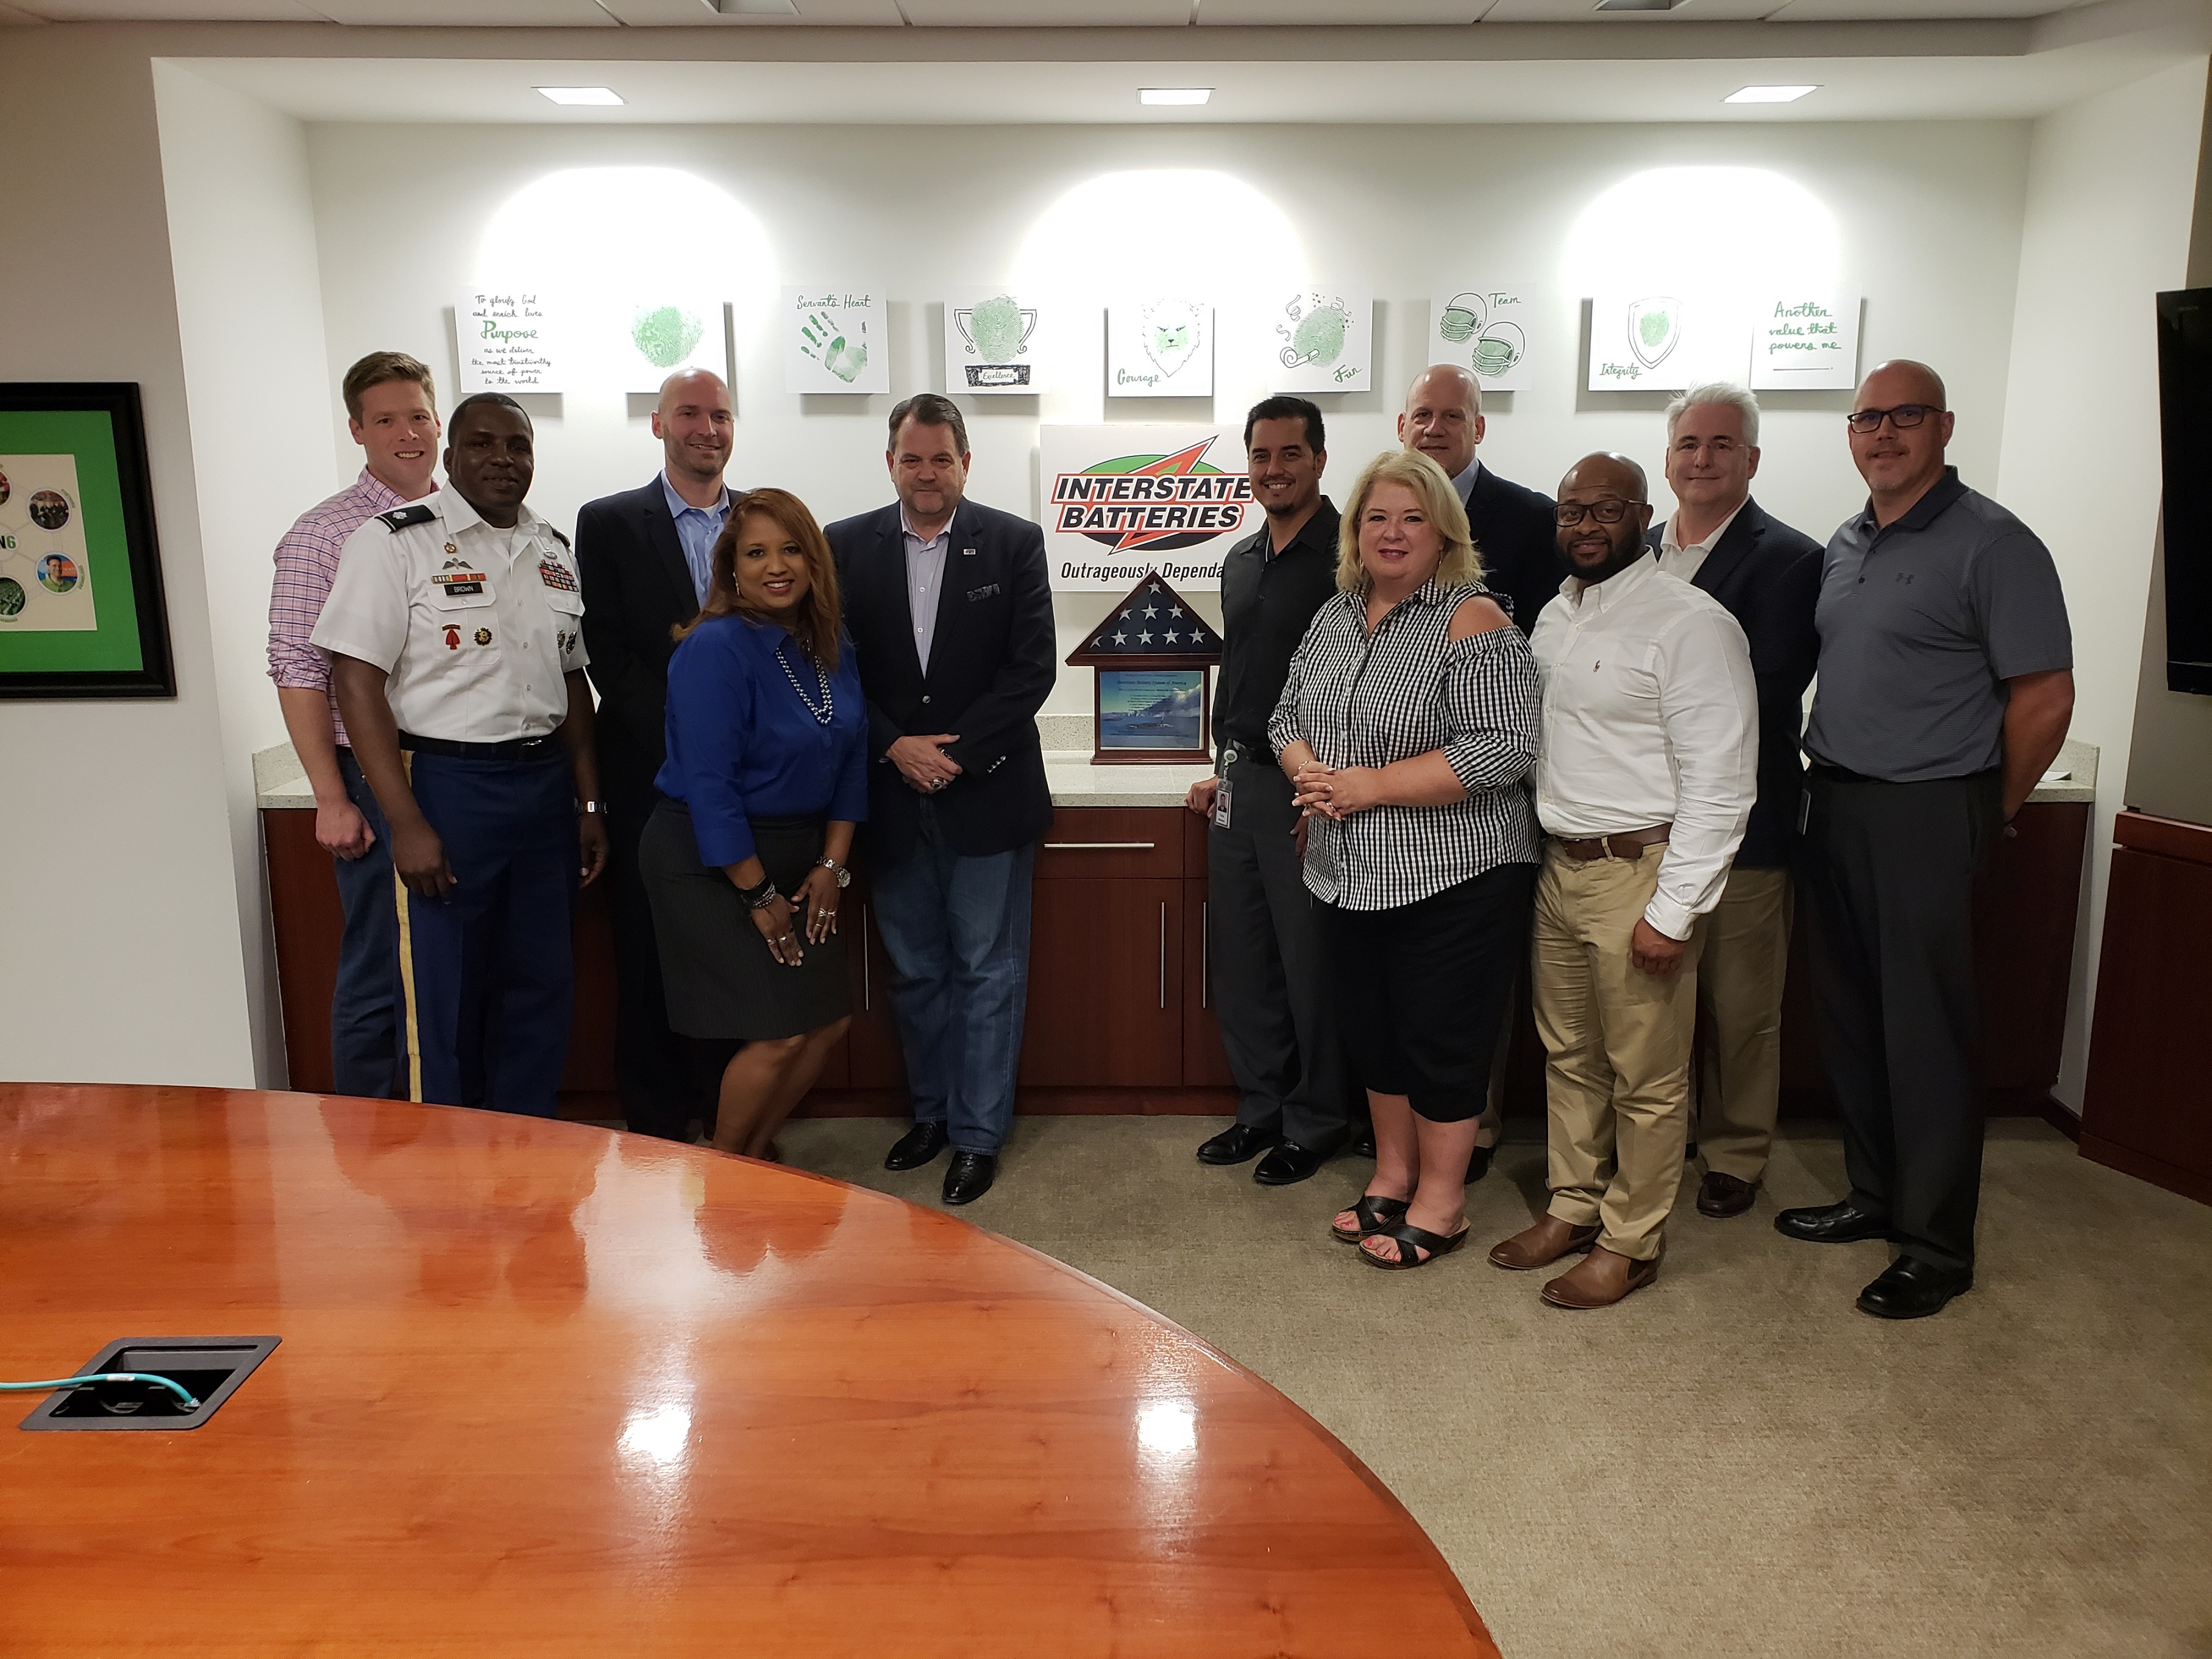 In June 2018, Interstate was honored by the Department of Labor for leadership in veteran outreach through its Values Mission Hiring Initiative.